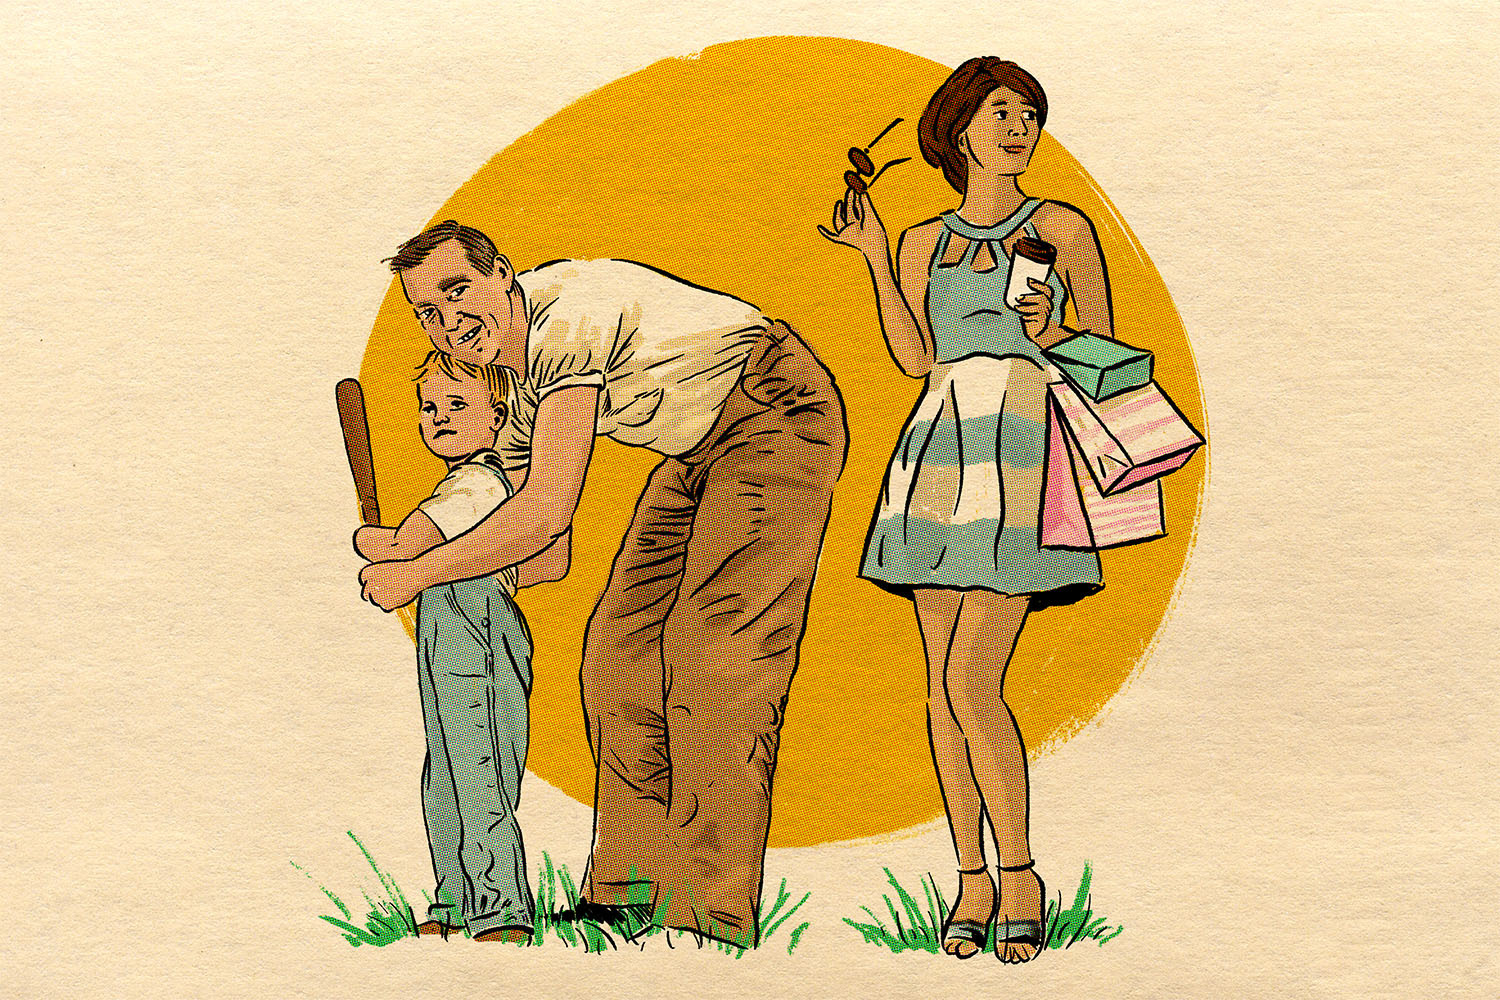 illustration shows a father helping a young boy swing a baseball bat, while a young woman in a dress carrying shopping bags stands off to the side